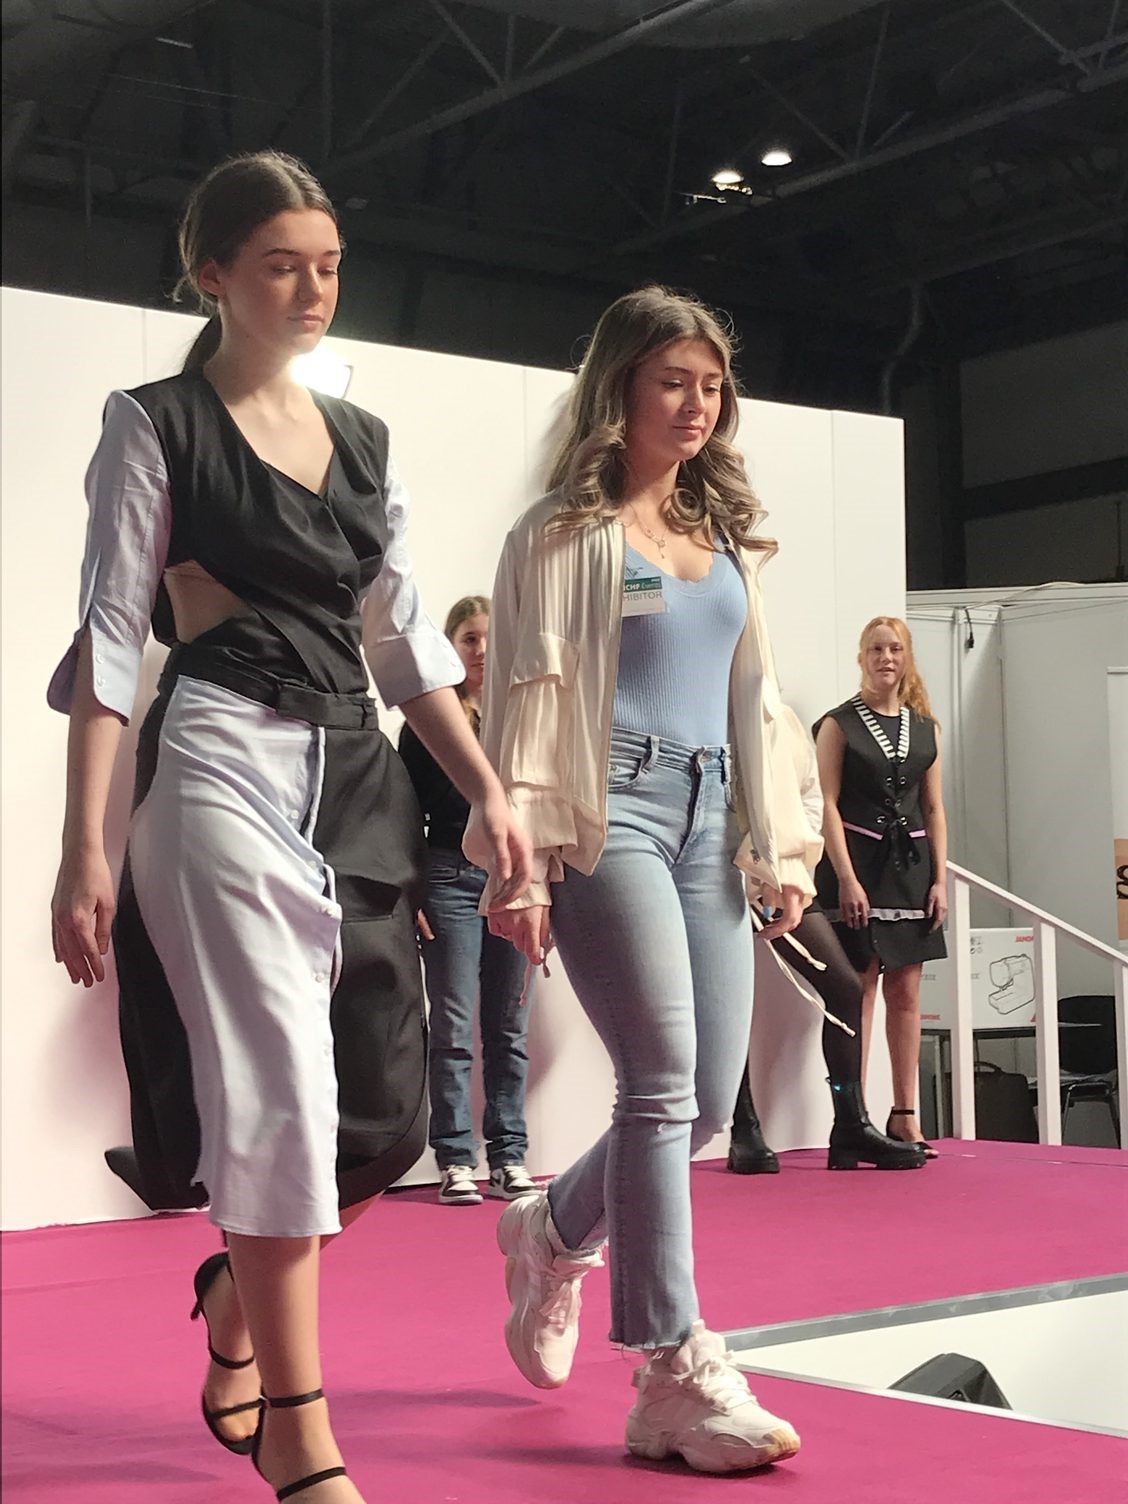 Emily and Grace on the catwalk